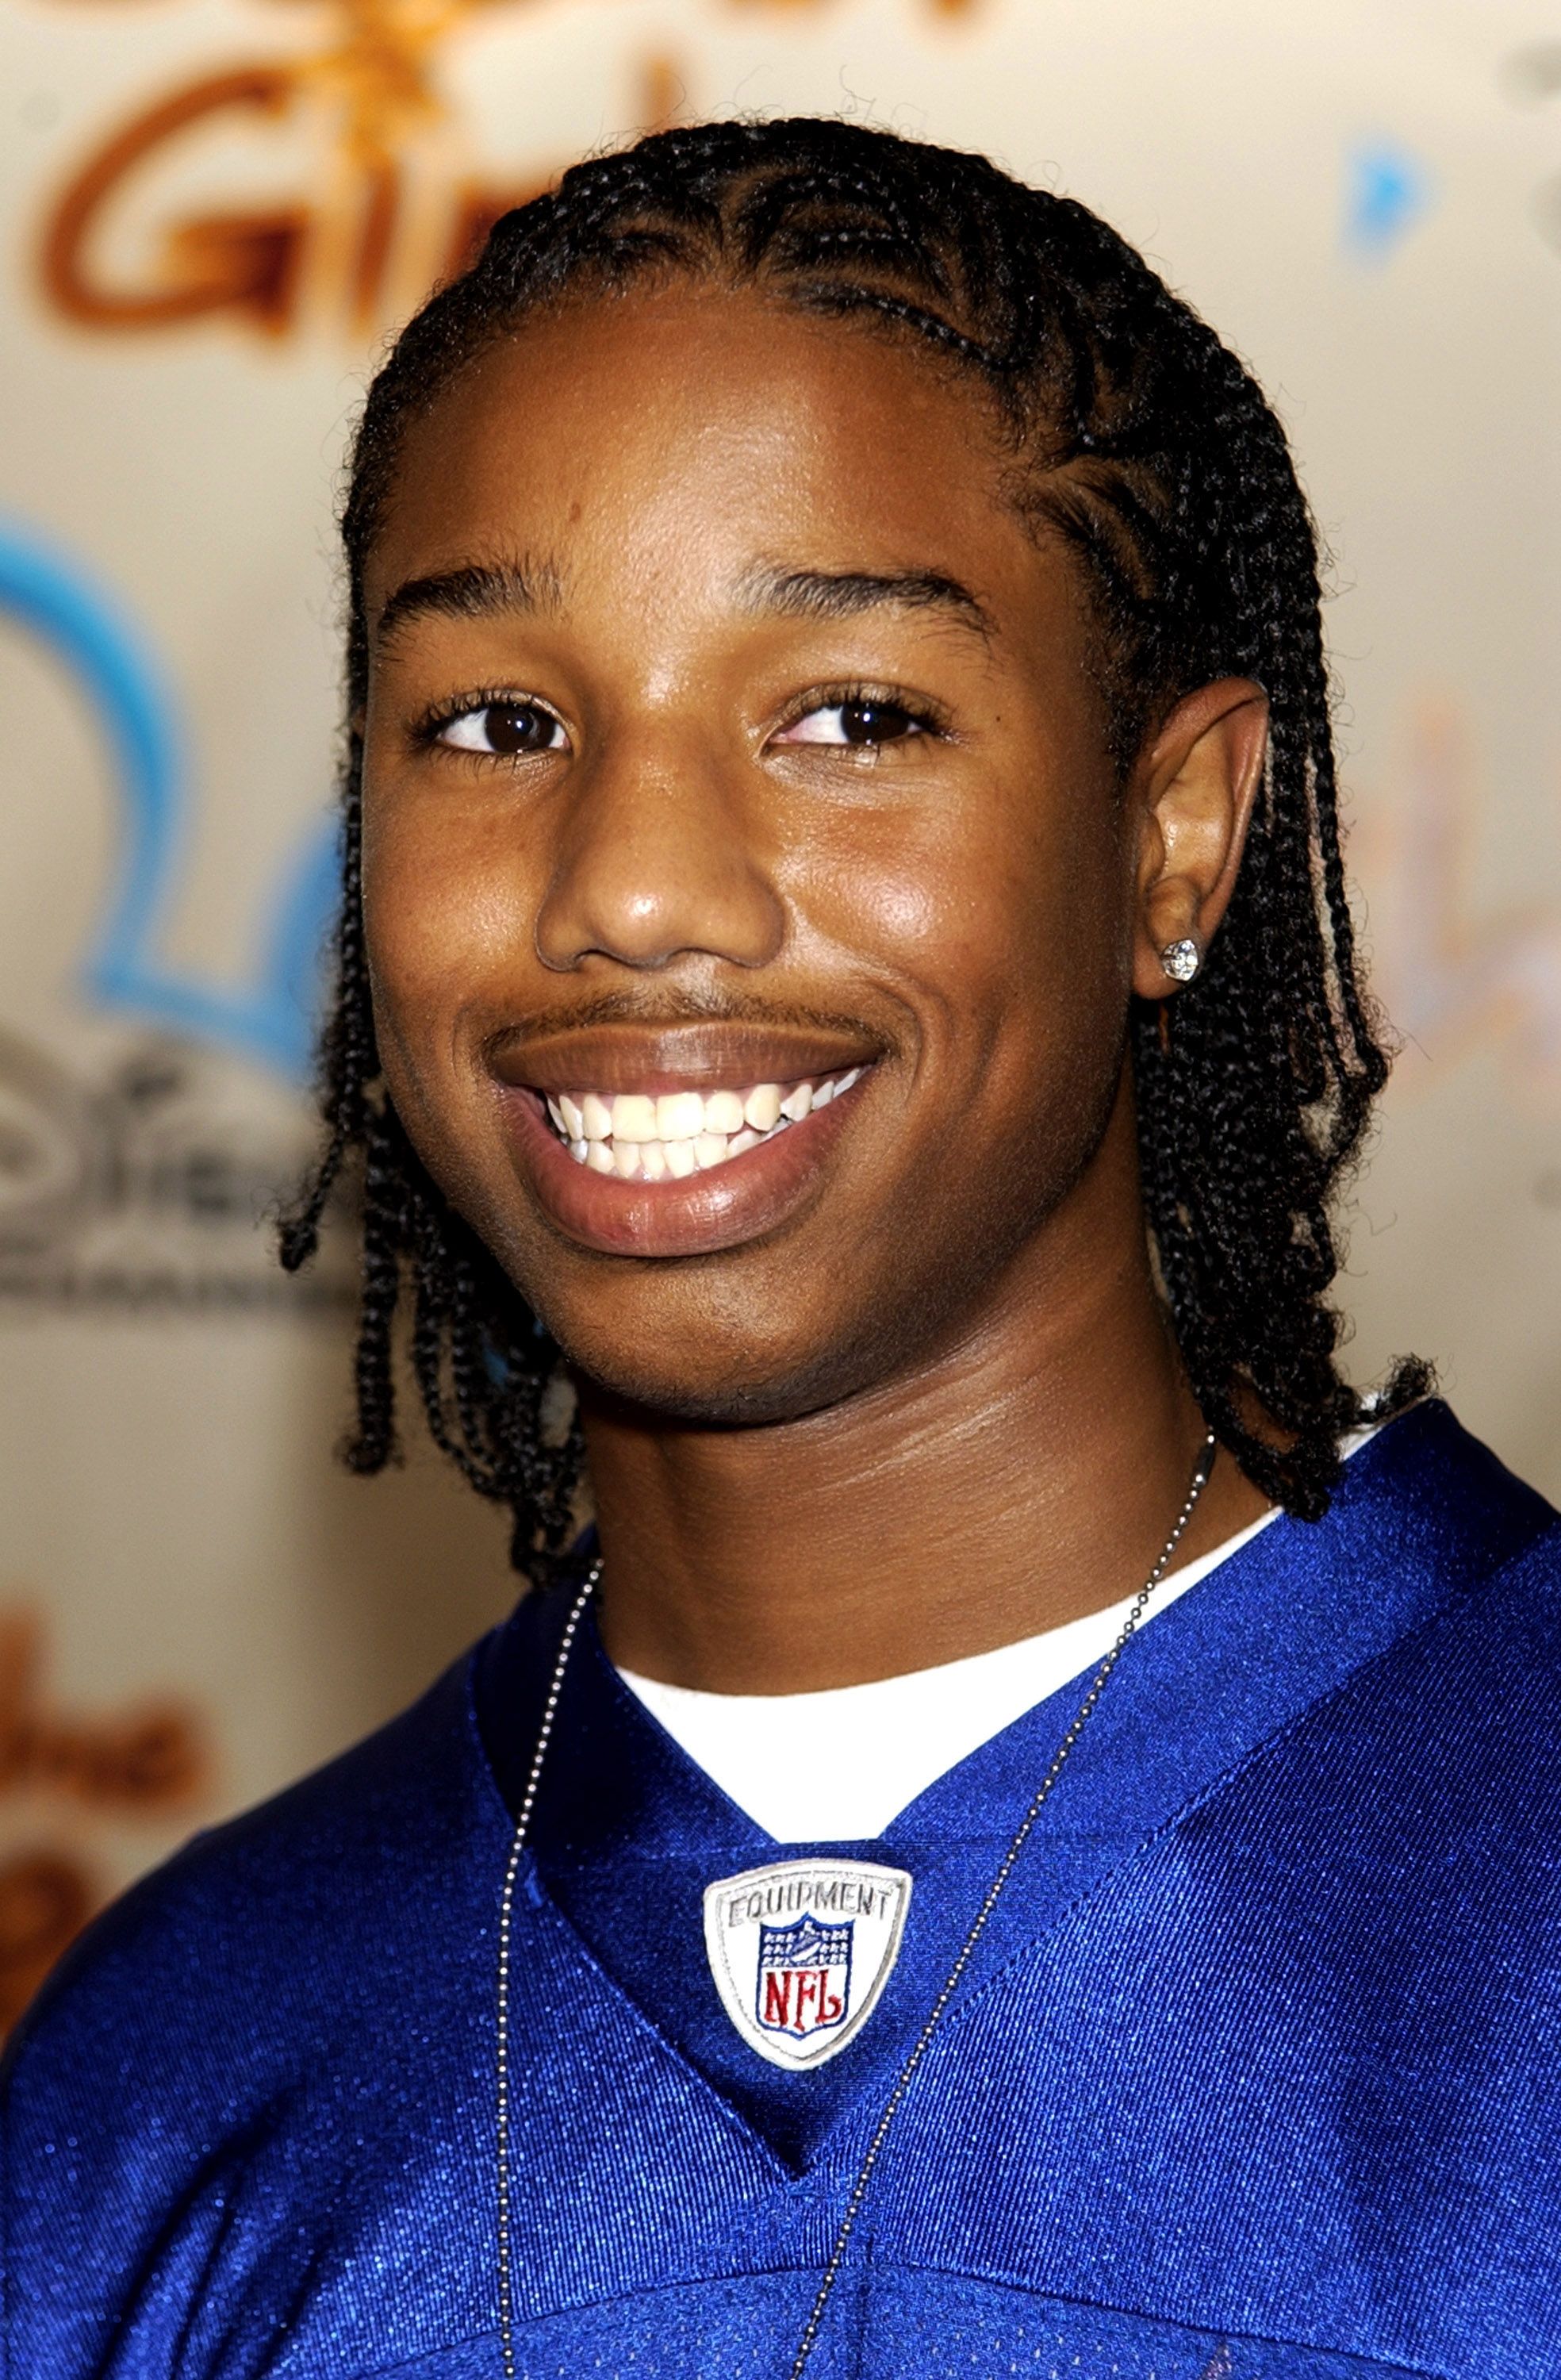 Michael B. Jordan at La Guardia High School in New York City attending the NY premiere of "The Cheetah Girls” by Disney. | Photo: Getty Images